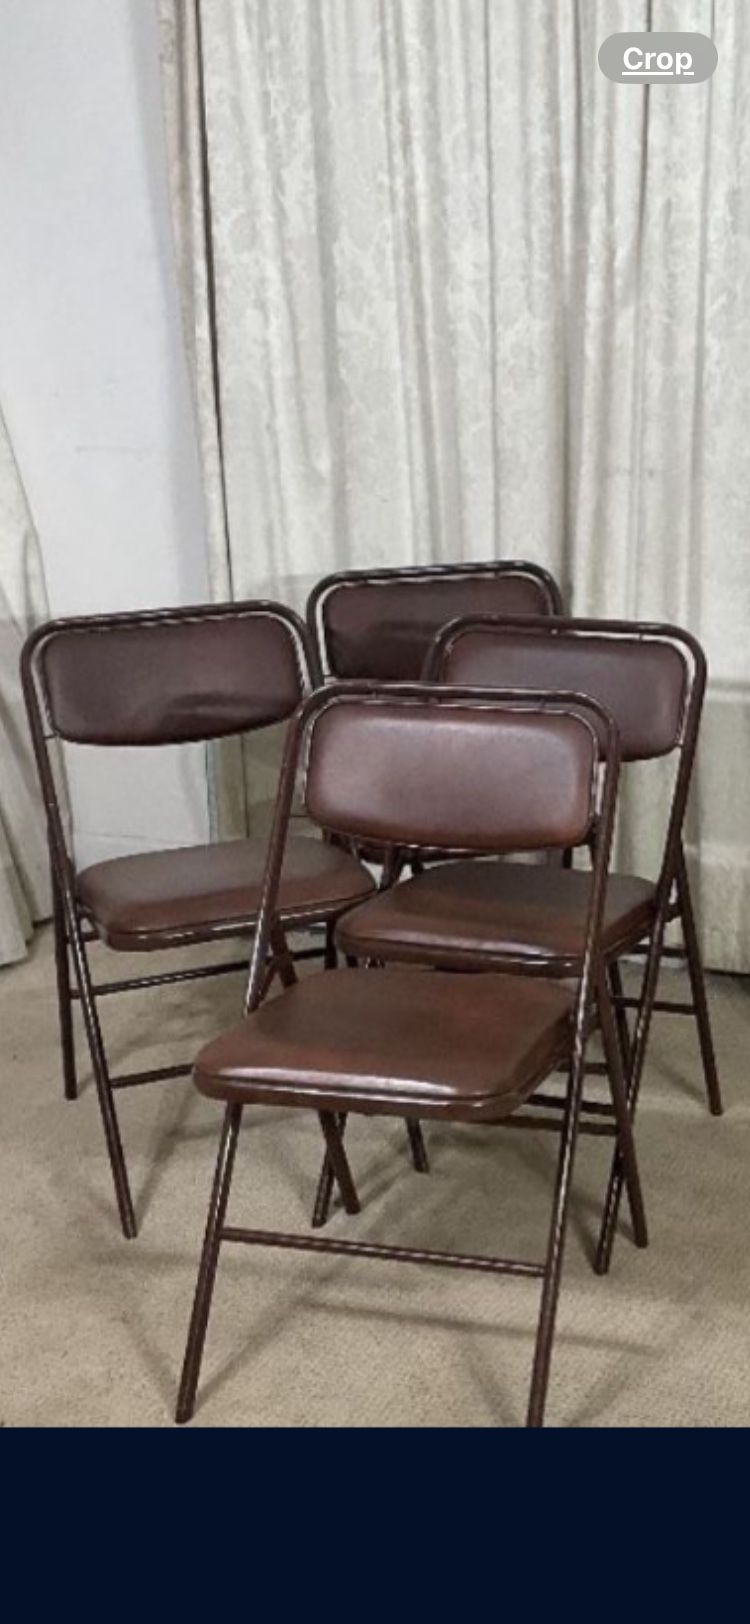 Cushioned Seat & Back Folding Chairs (4) Indoor & Outdoor Use